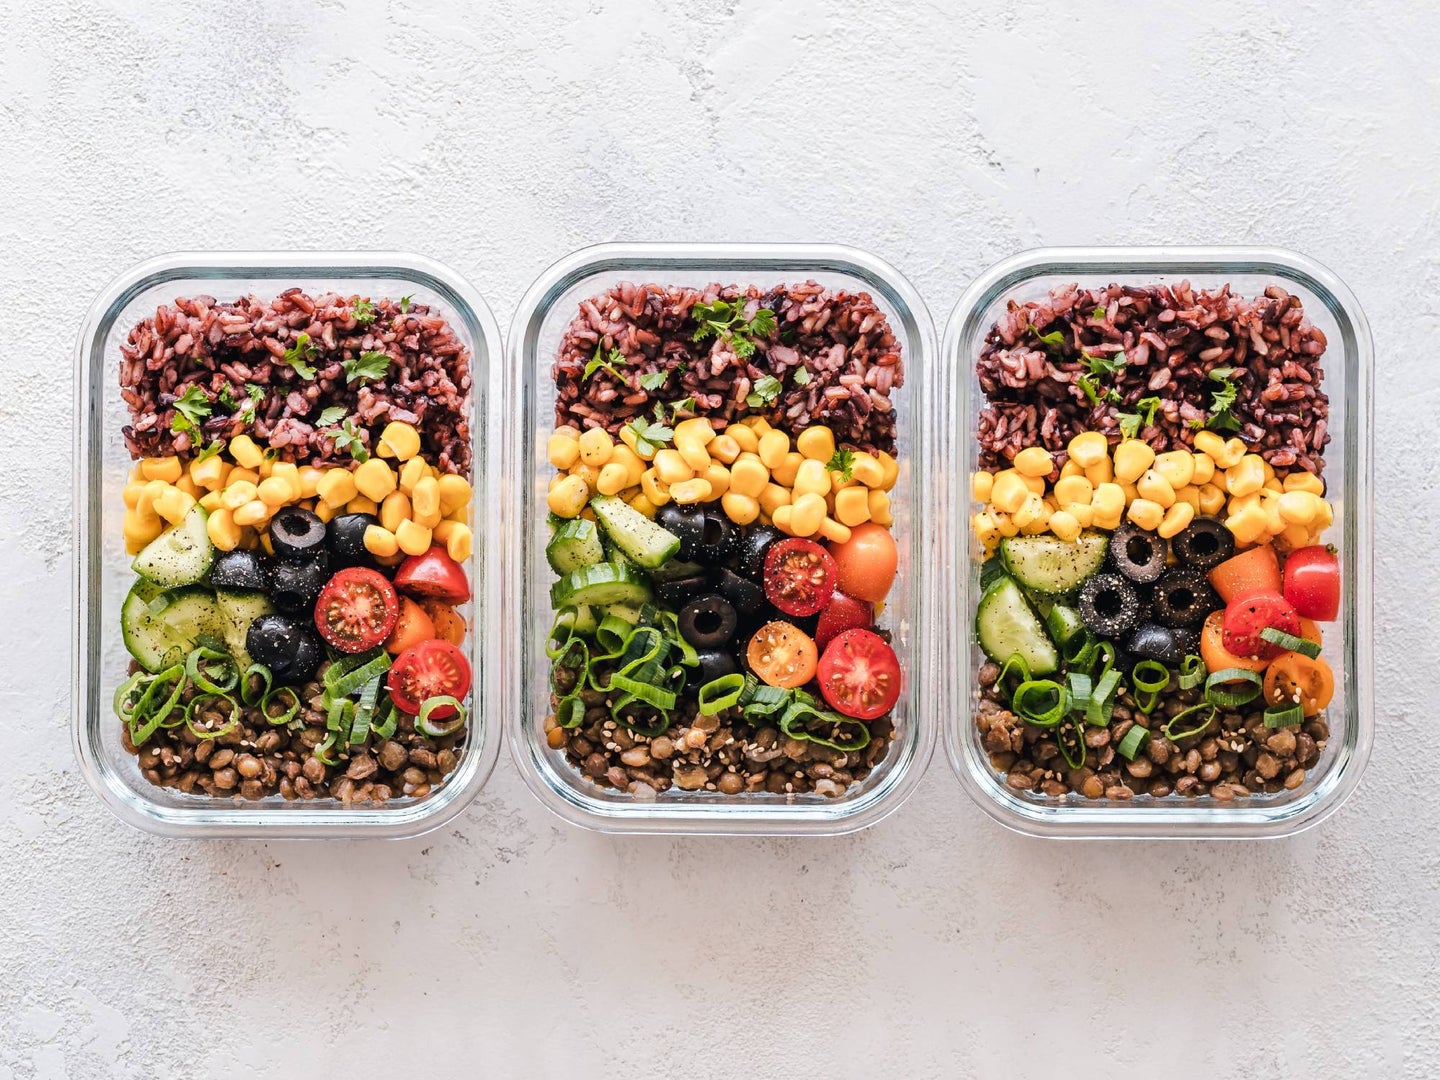 Row of neatly arranged food containers with salad.